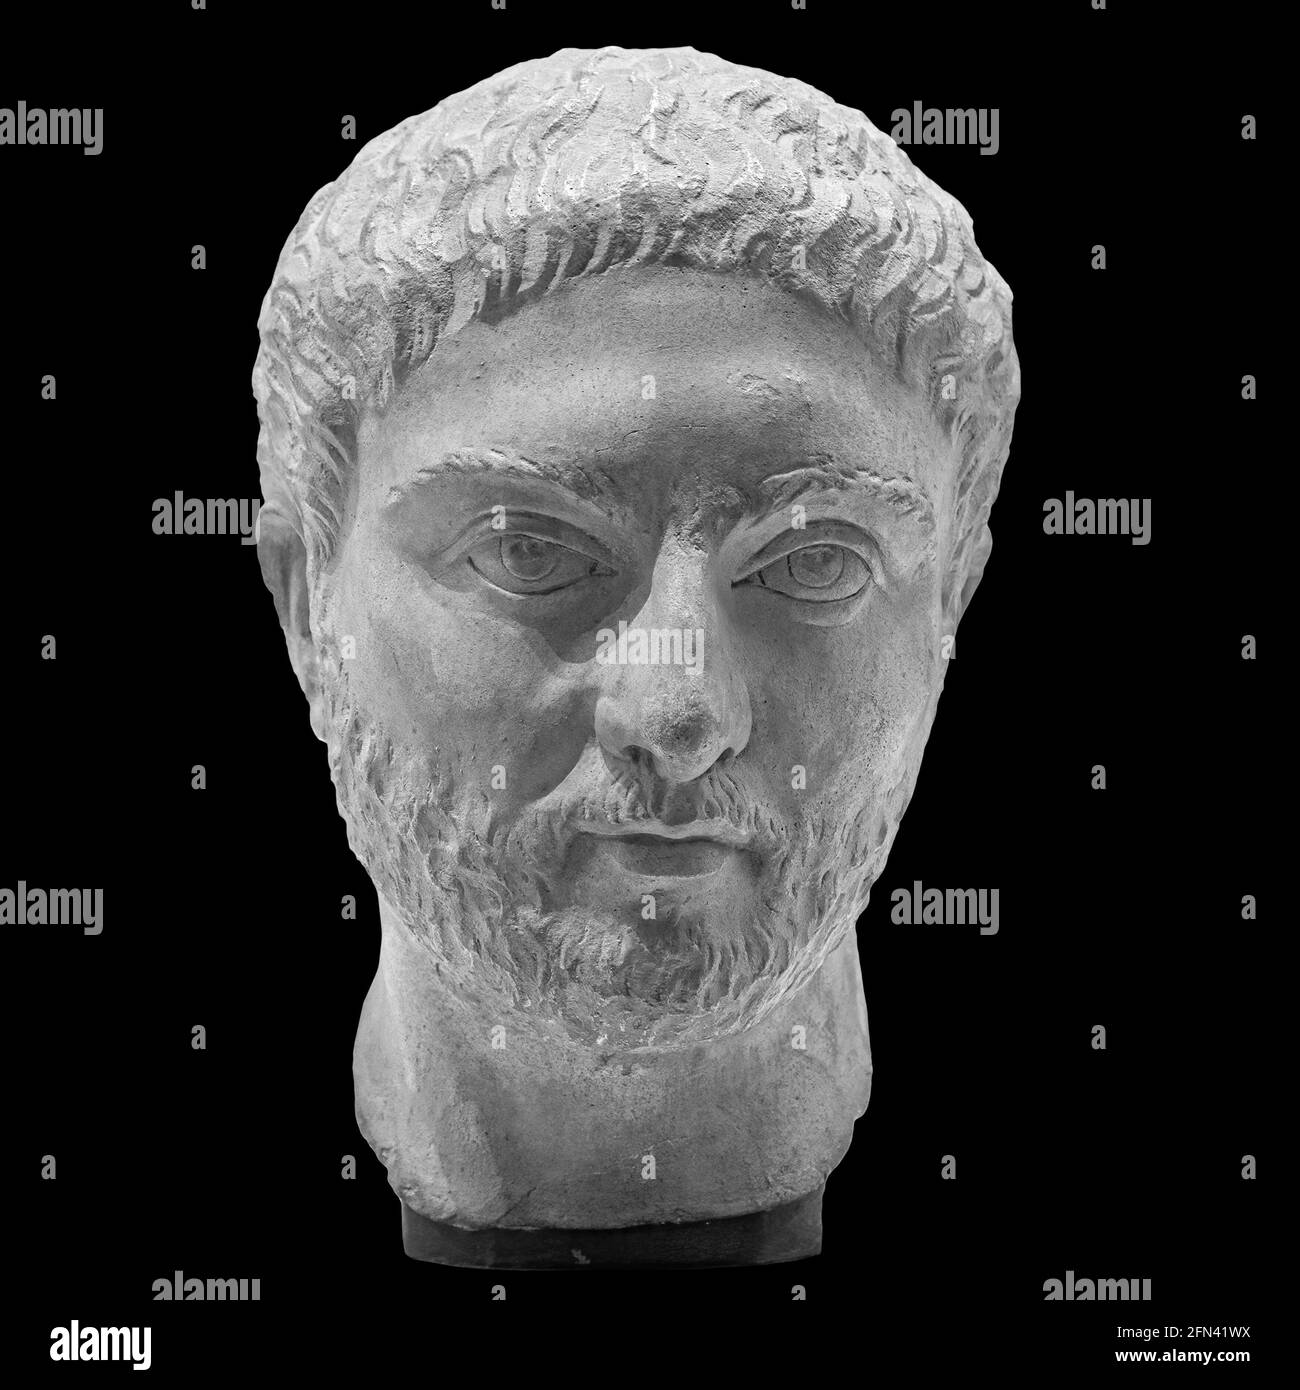 Gypsum copy of ancient statue man with beard head isolated on black background. Plaster sculpture man face Stock Photo